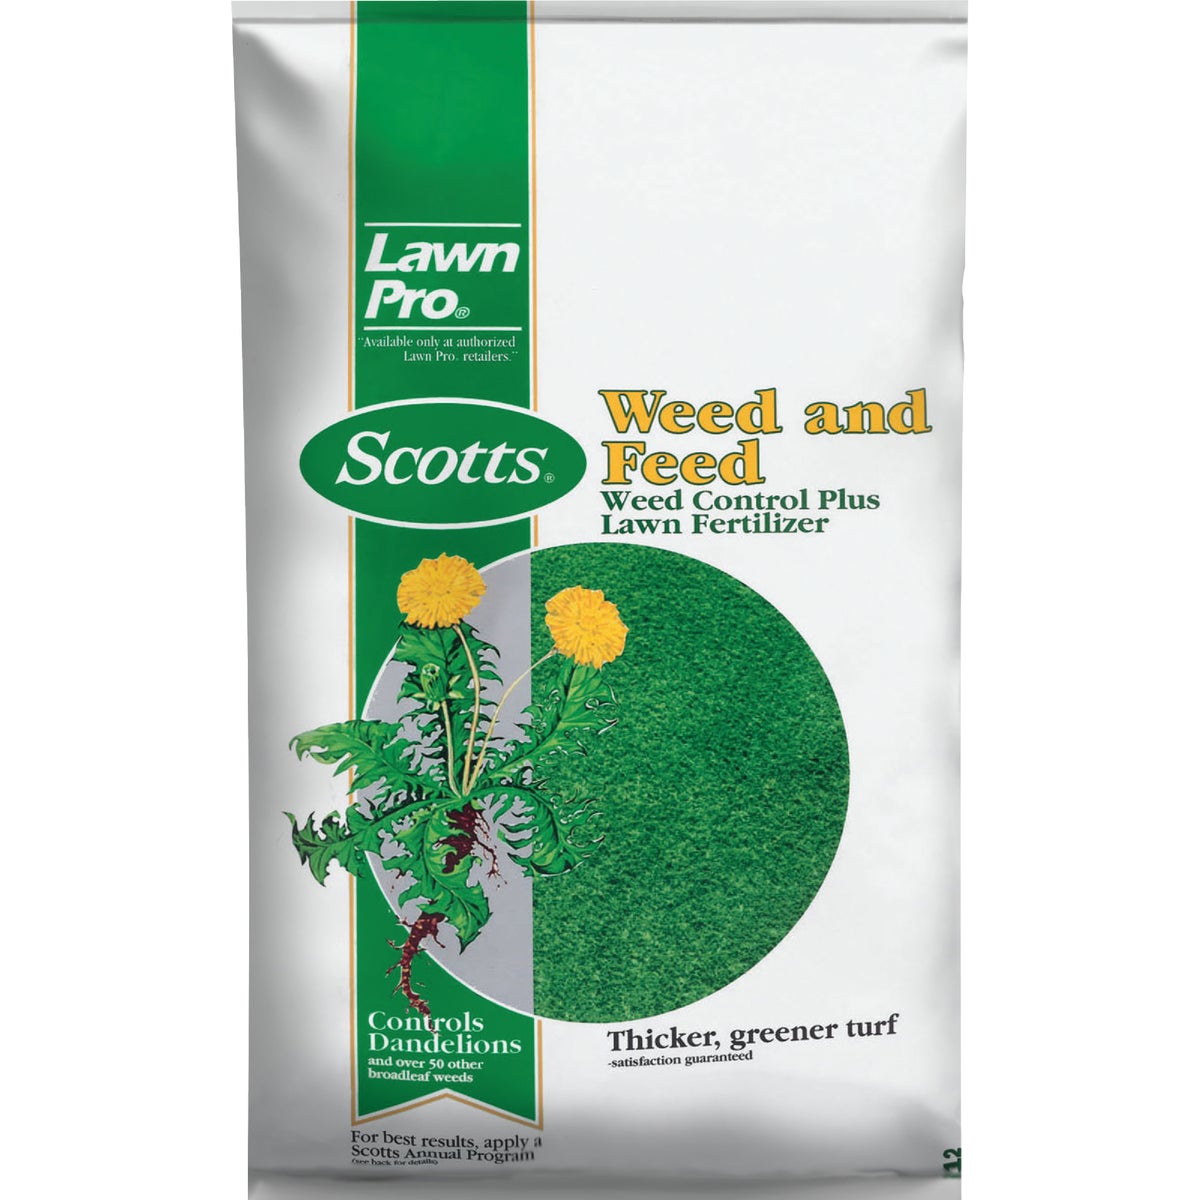 Scotts Lawn Pro Weed & Feed 14.88 Lb. 5000 Sq. Ft. Weed Control Plus Lawn Fertilizer 